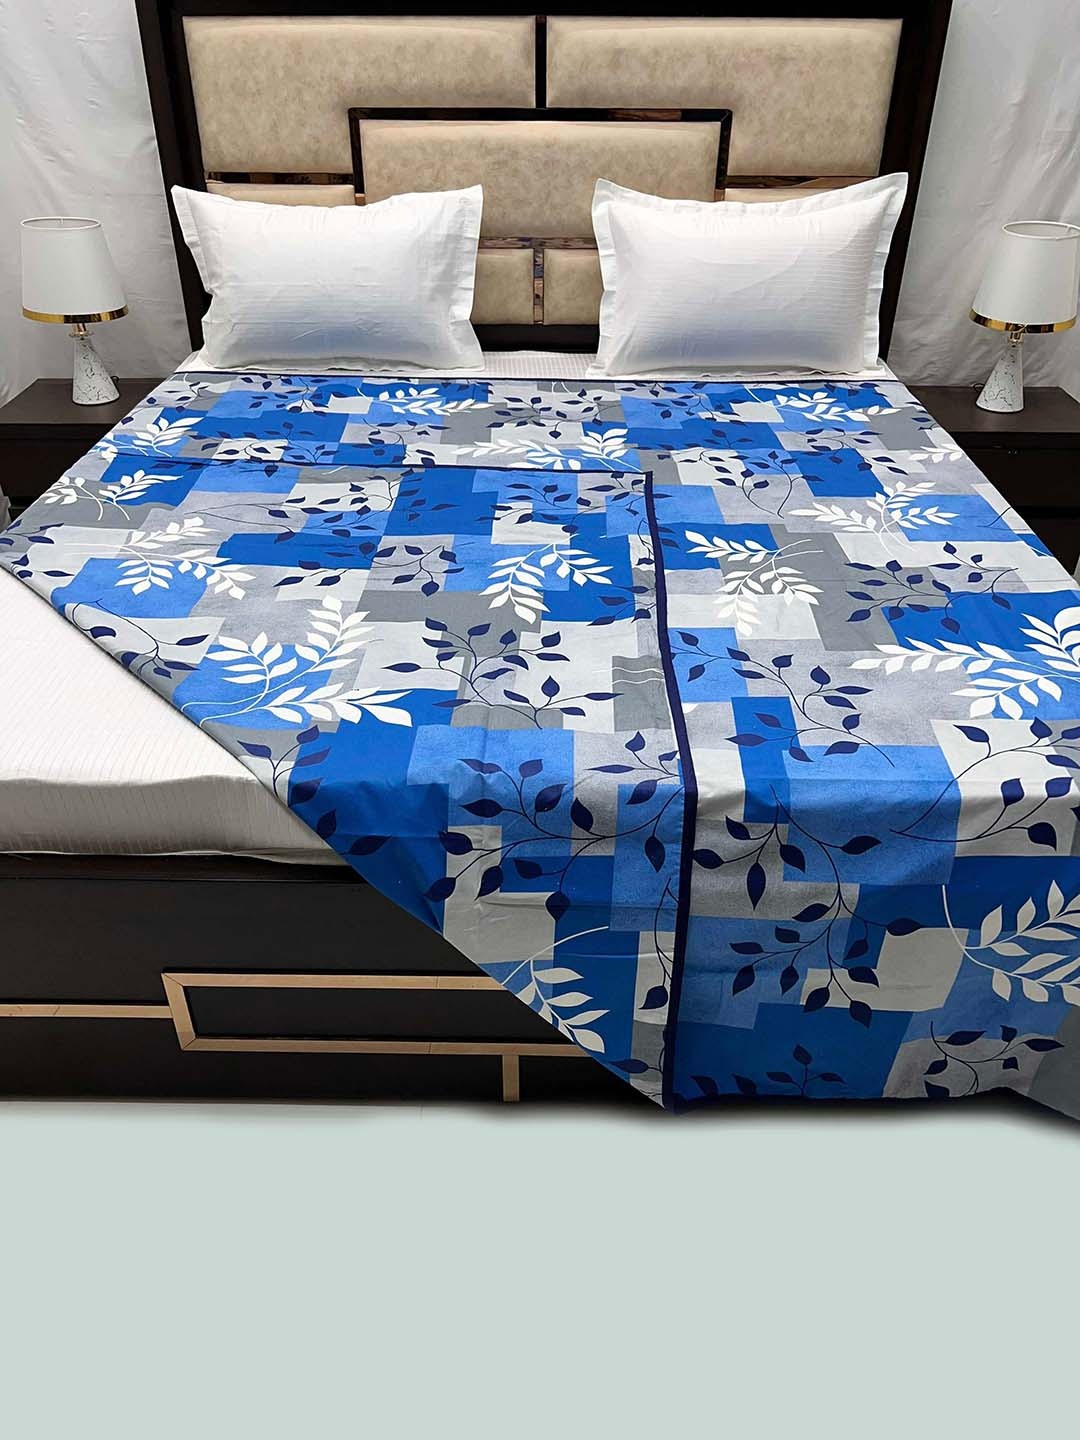 

Pure Decor Blue & Grey Colored Printed Pure Cotton King Size Duvet Cover